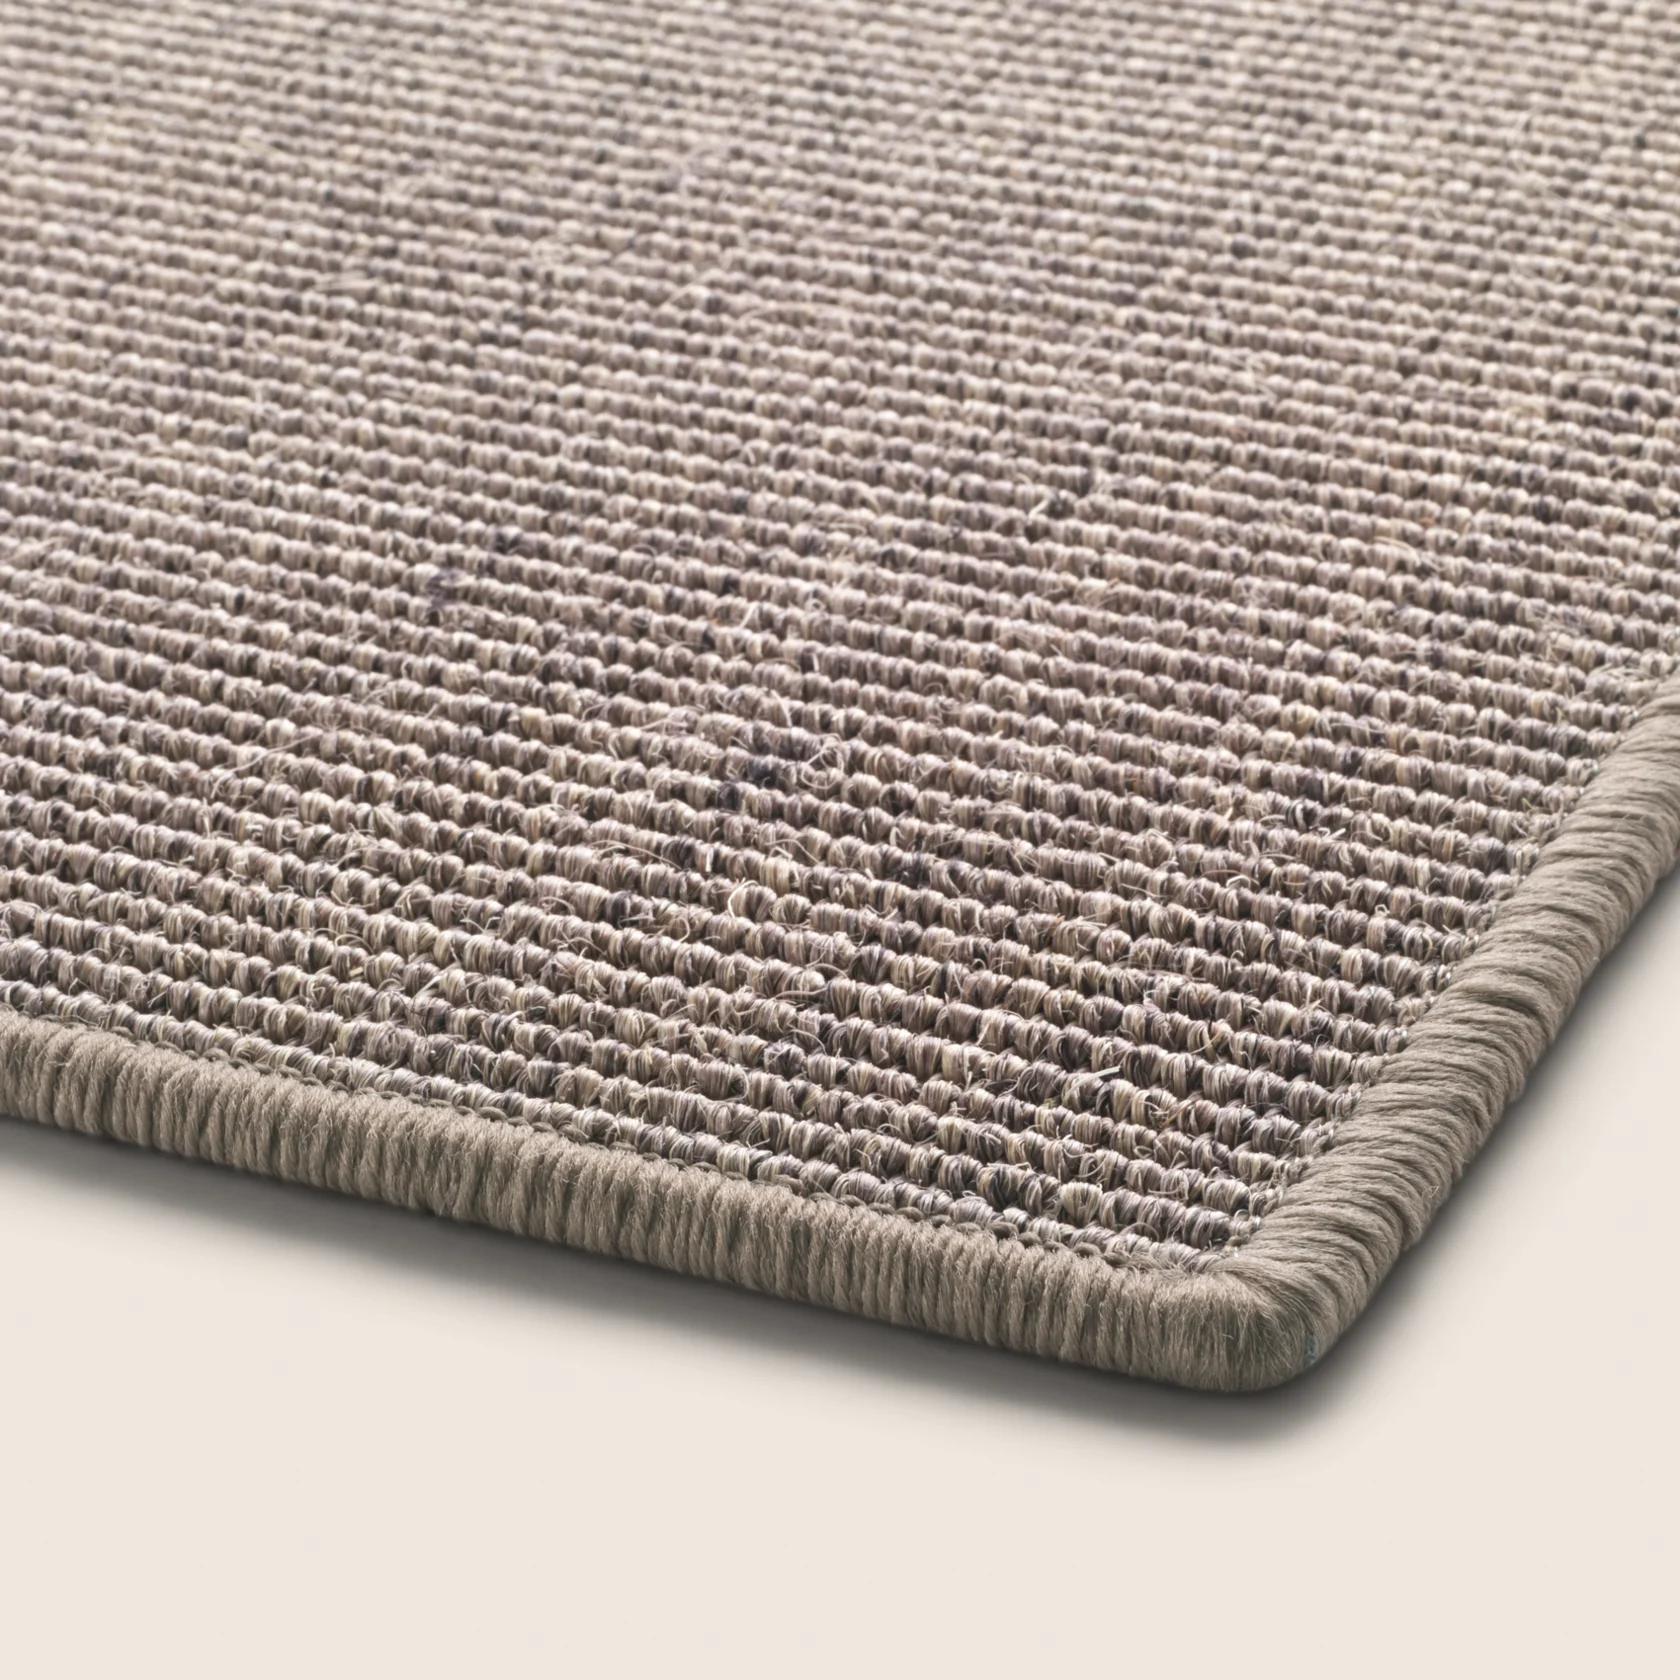 024401_THE RUG_LEANDRO 371_ACCESSORIES_--LEANDRO 371--.png